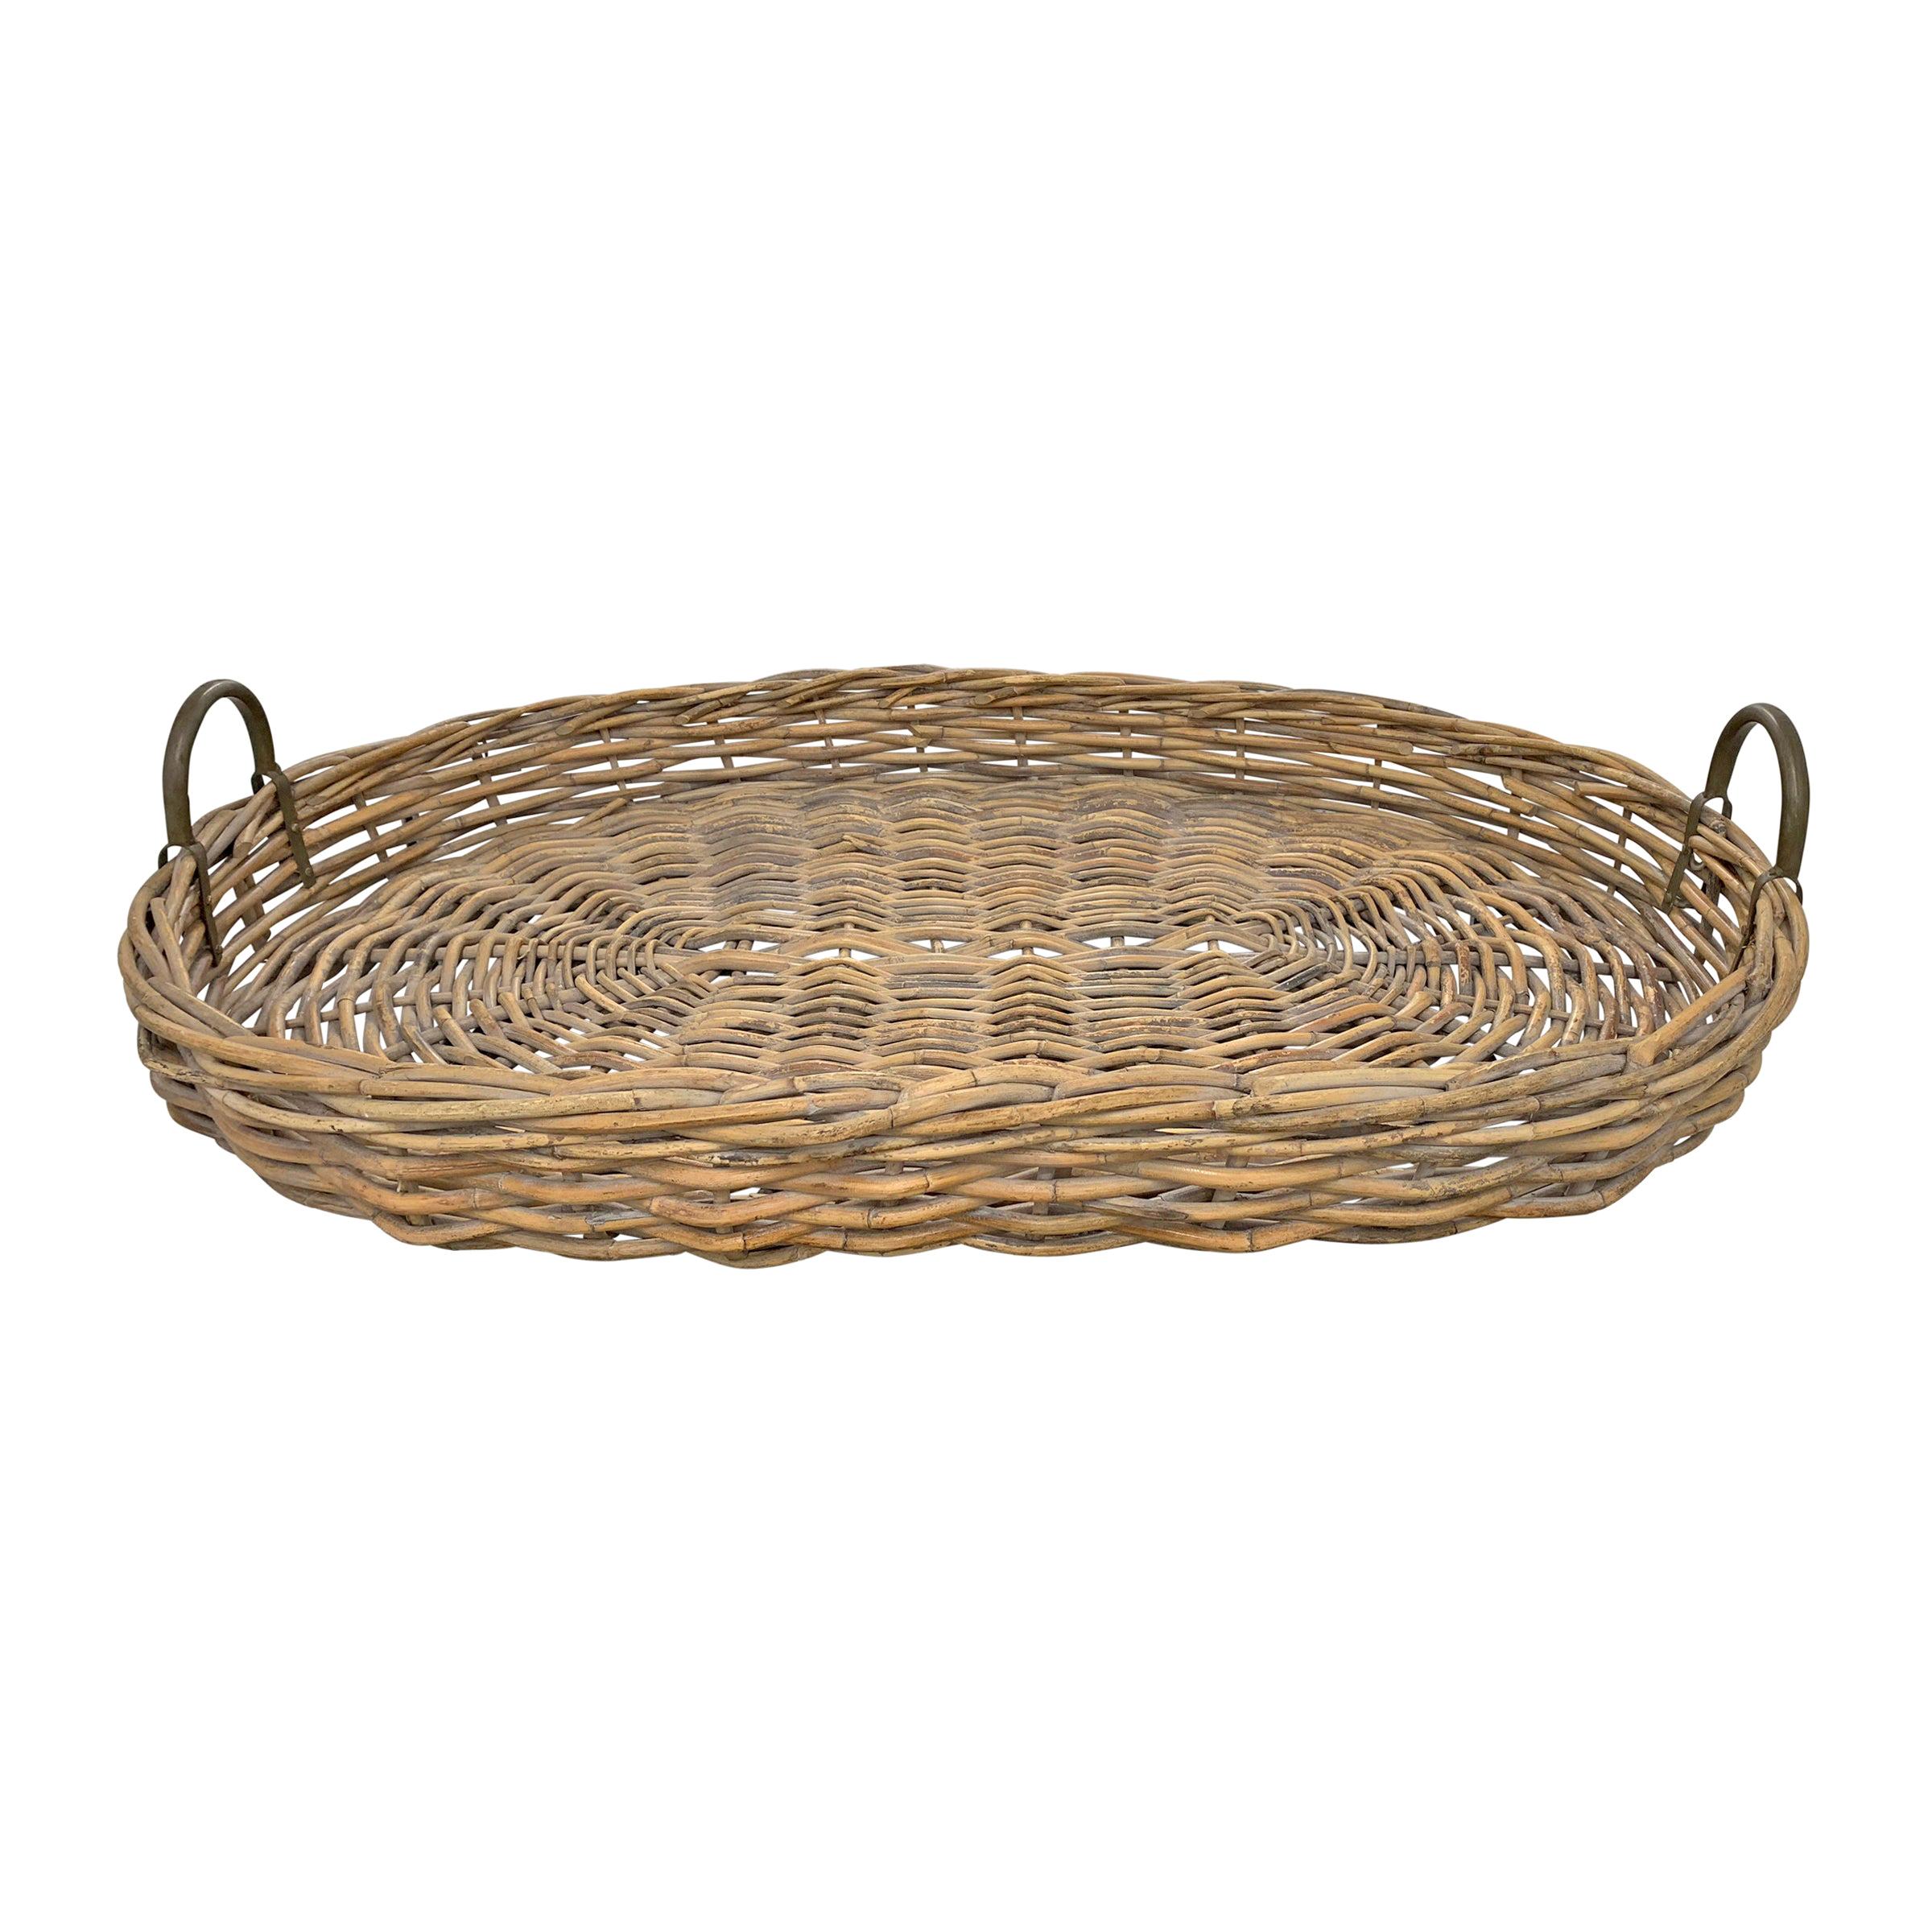 Large Woven Willow Tray